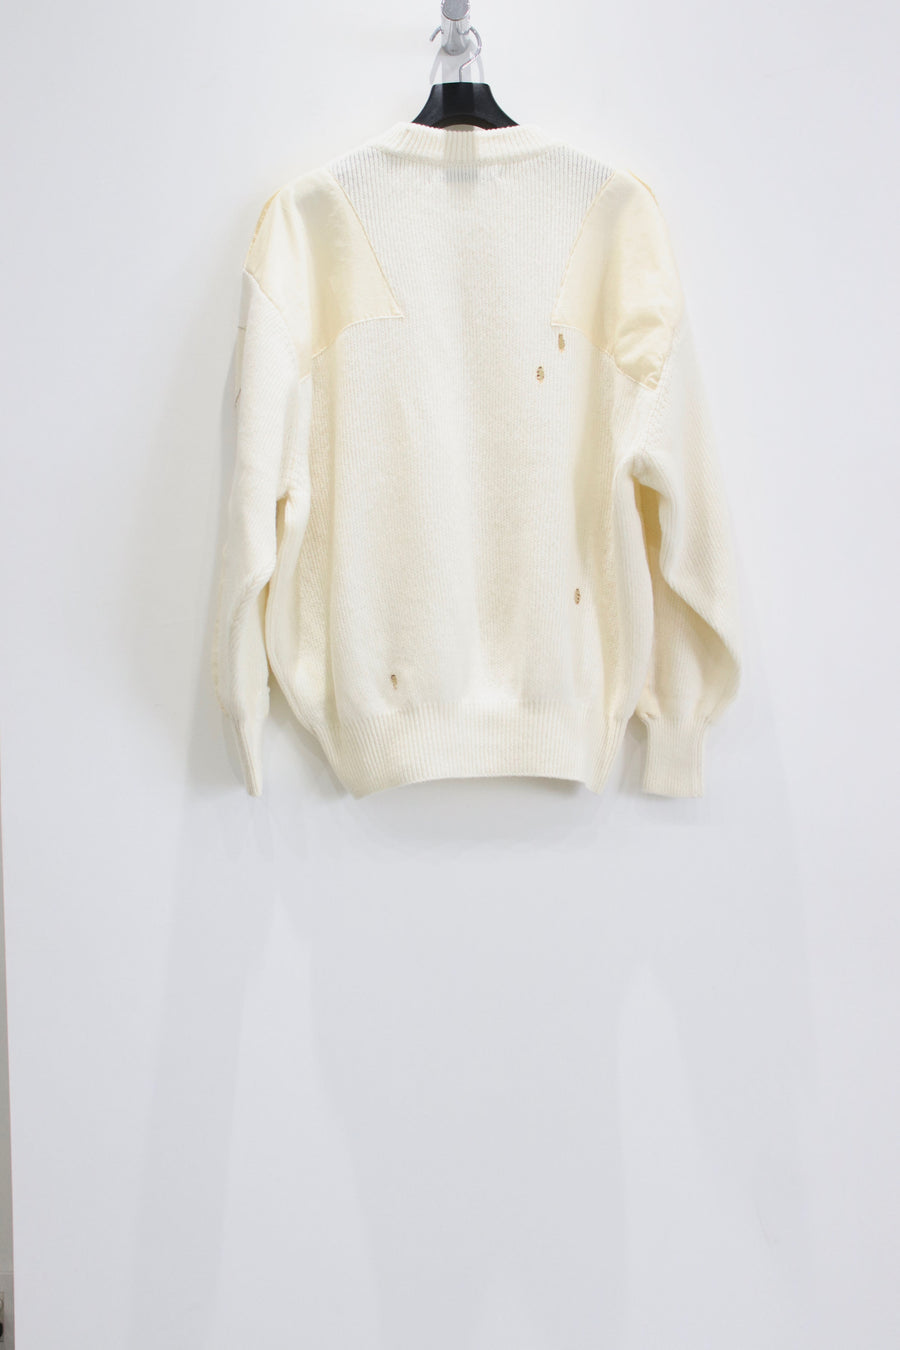 Children of the discordance  7G CIGARETTE HOLE COMMAND KNIT(OFF WHITE)